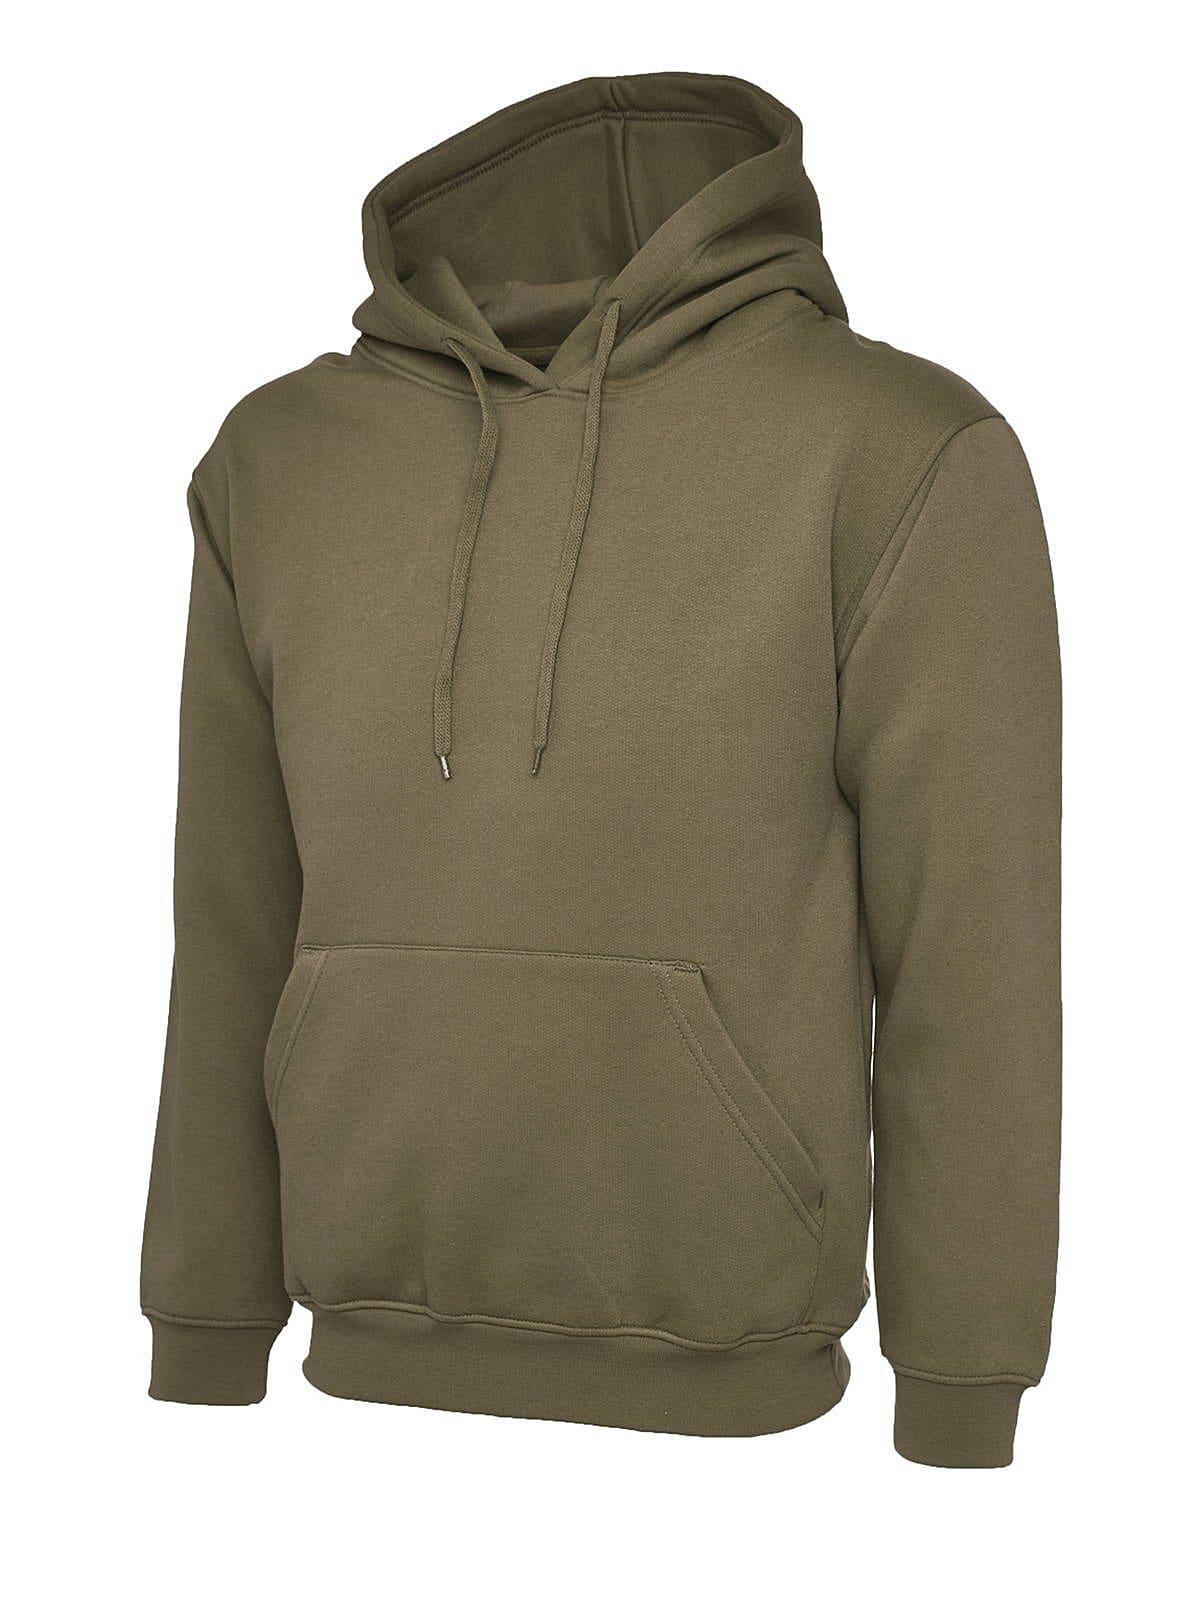 Uneek 300GSM Classic Hoodie in Military Green (Product Code: UC502)